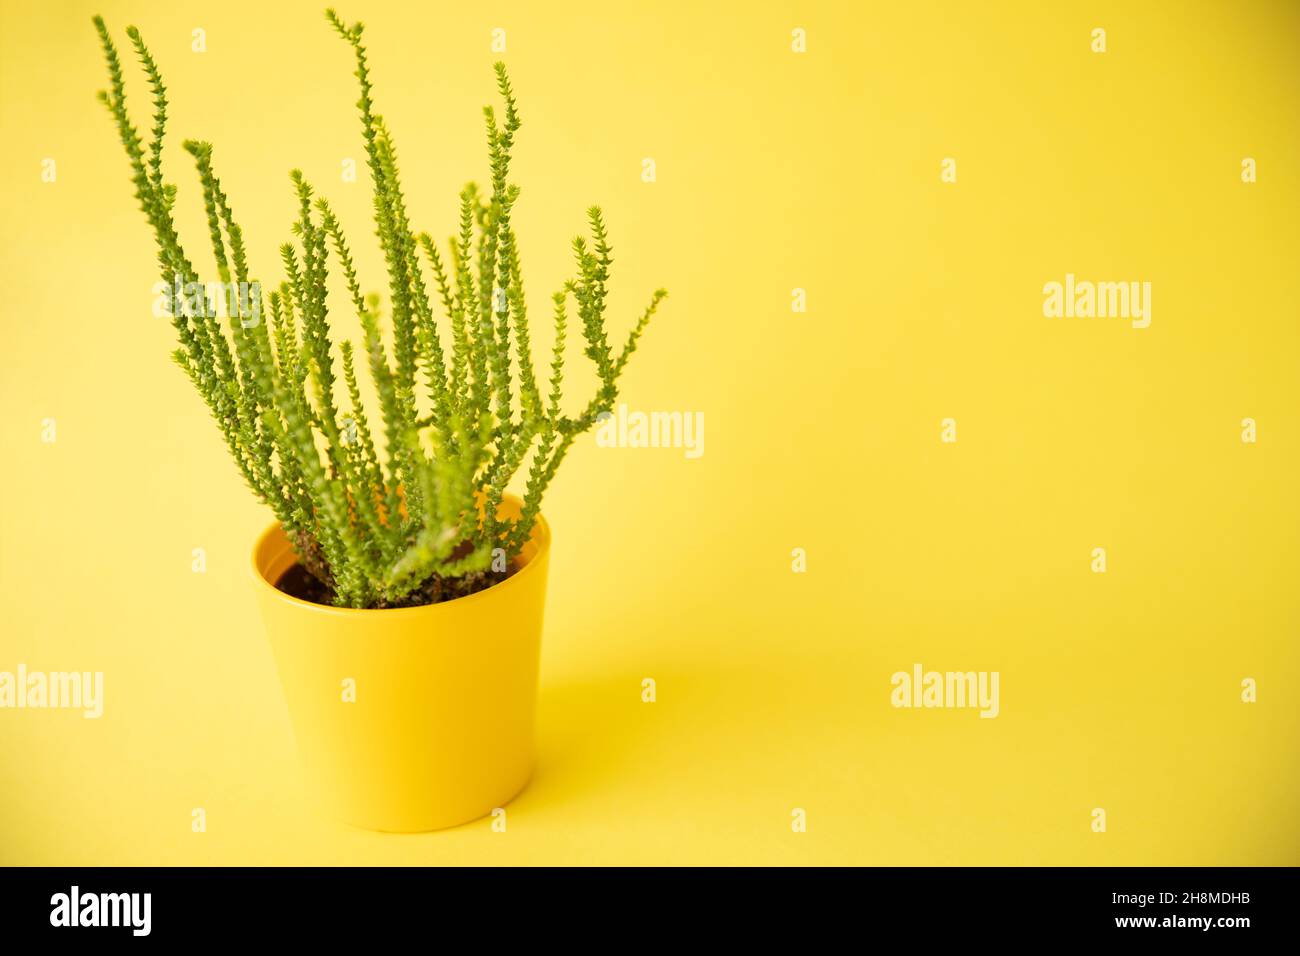 A flower with a green stem in a yellow pot on a yellow background Stock Photo